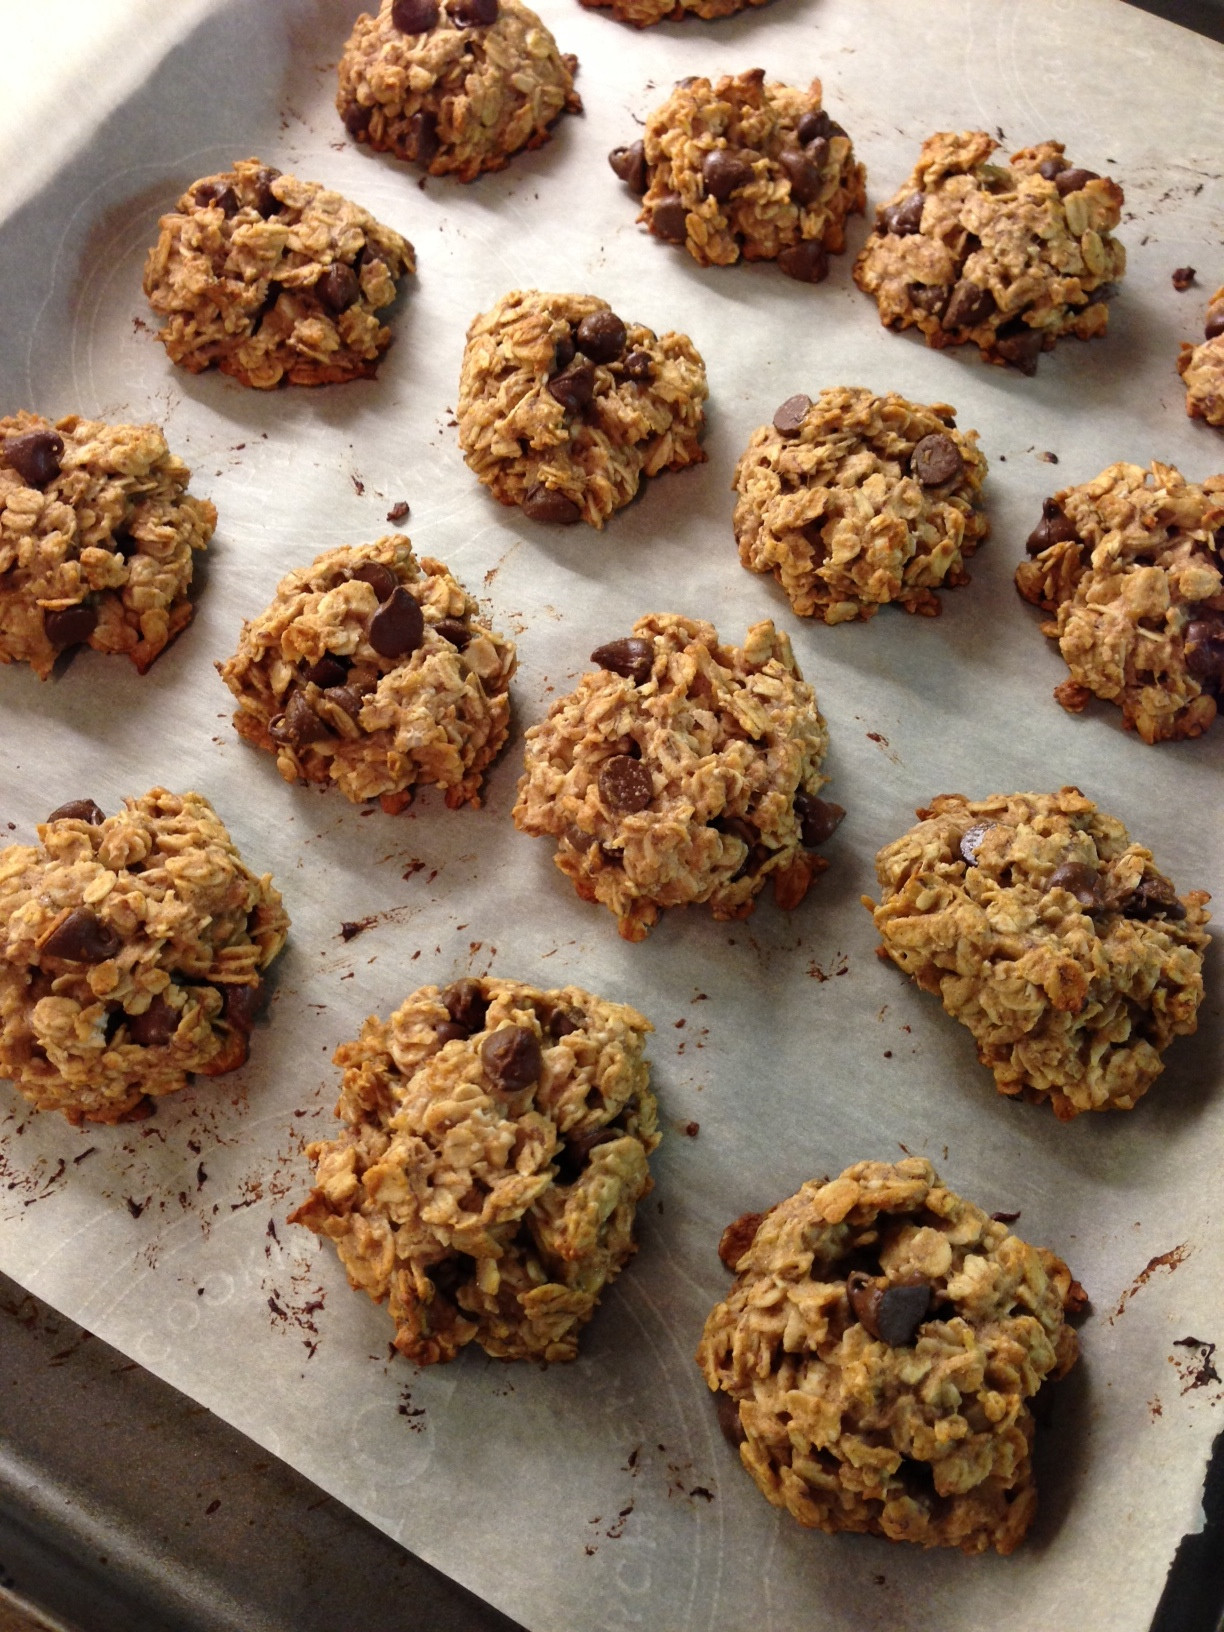 Chocolate Chip Oatmeal Cookies Healthy
 Healthy Oatmeal Chocolate Chip Cookies Lauren Follett